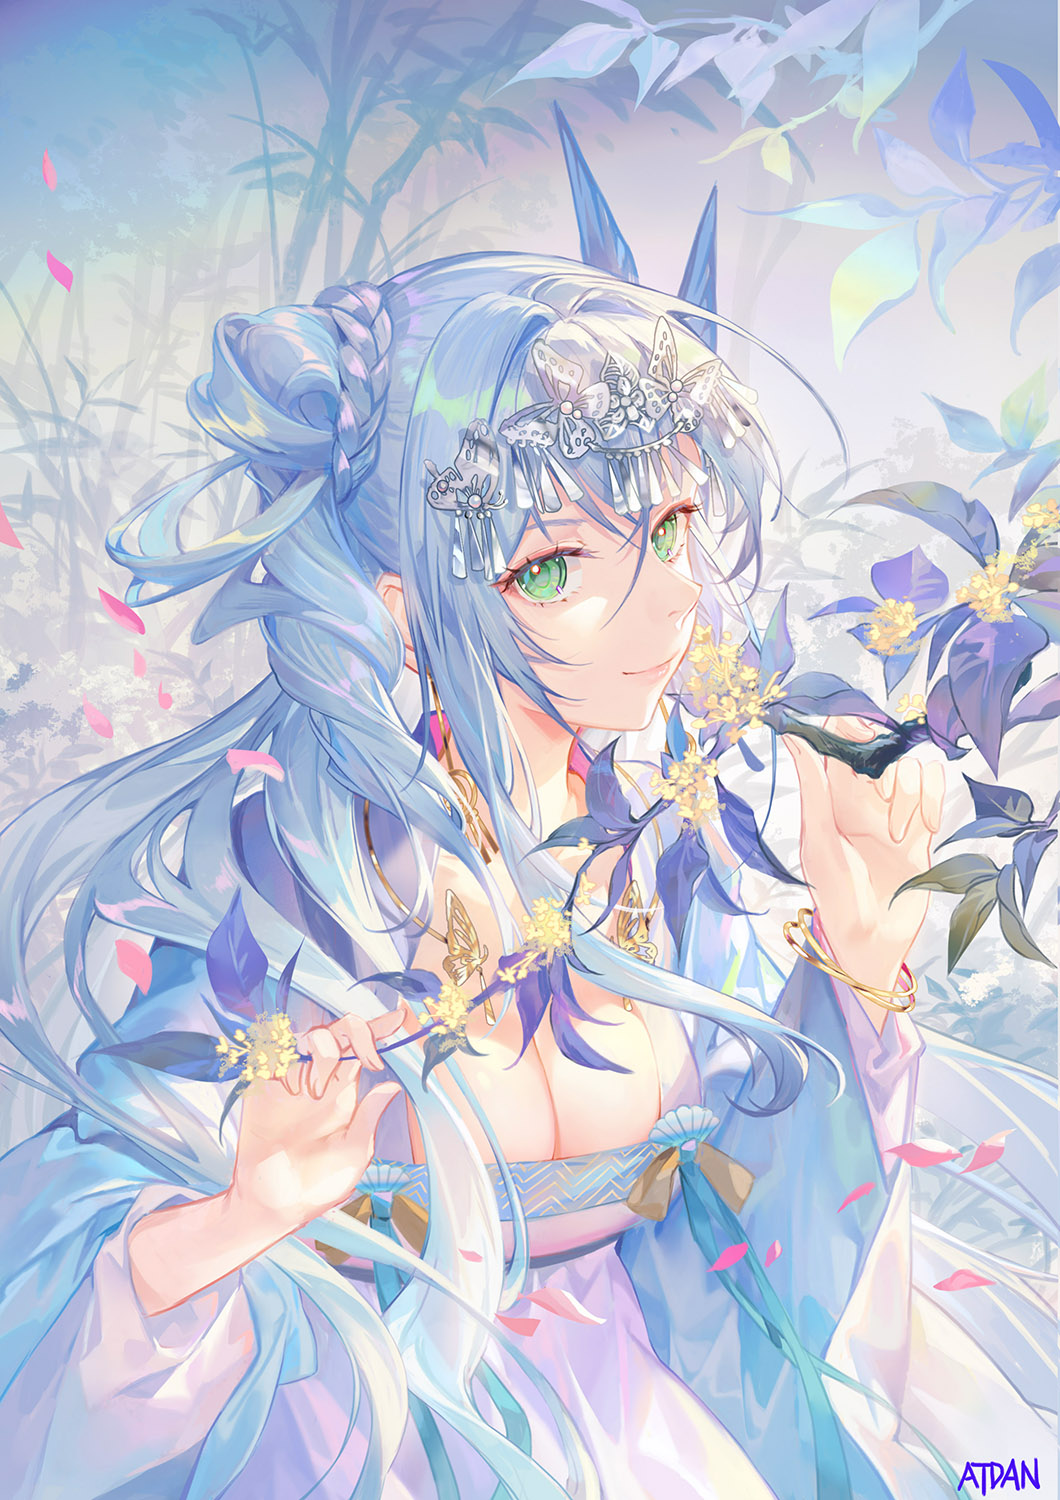 Anime 1060x1500 Pixiv anime anime girls Atdan blue hair portrait display leaves petals looking at viewer signature cleavage long hair green eyes